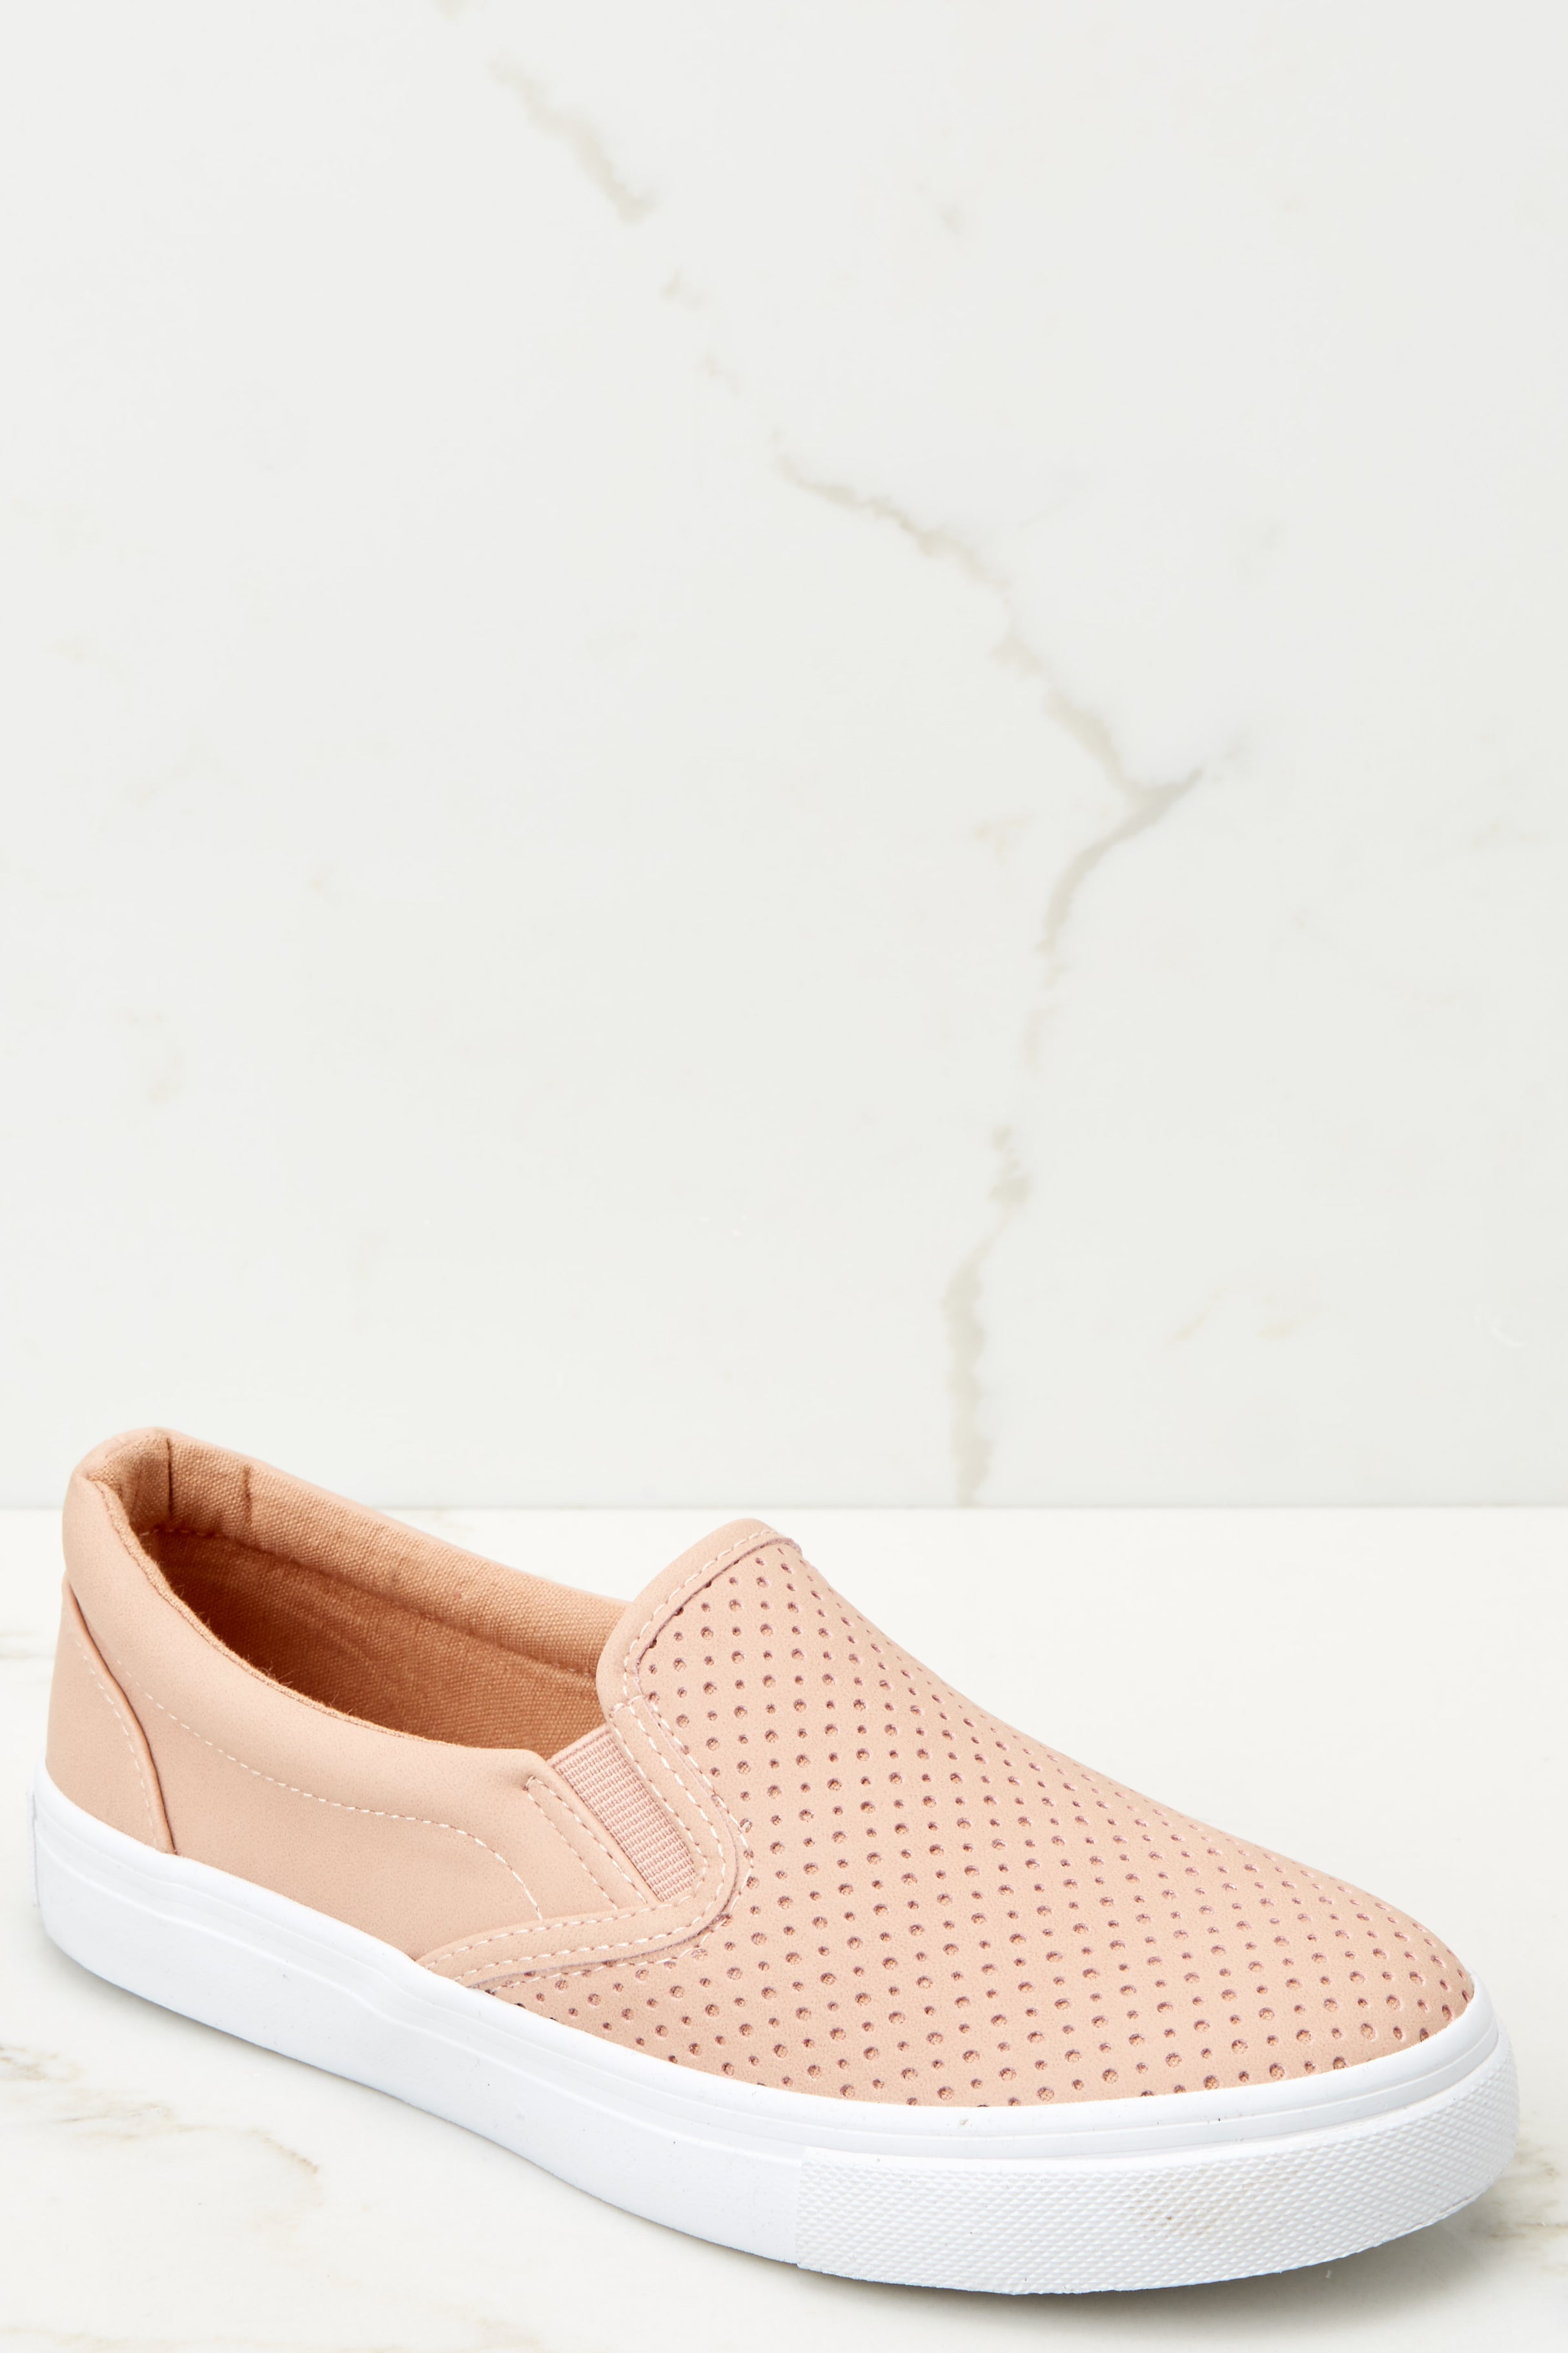 slip on cute shoes